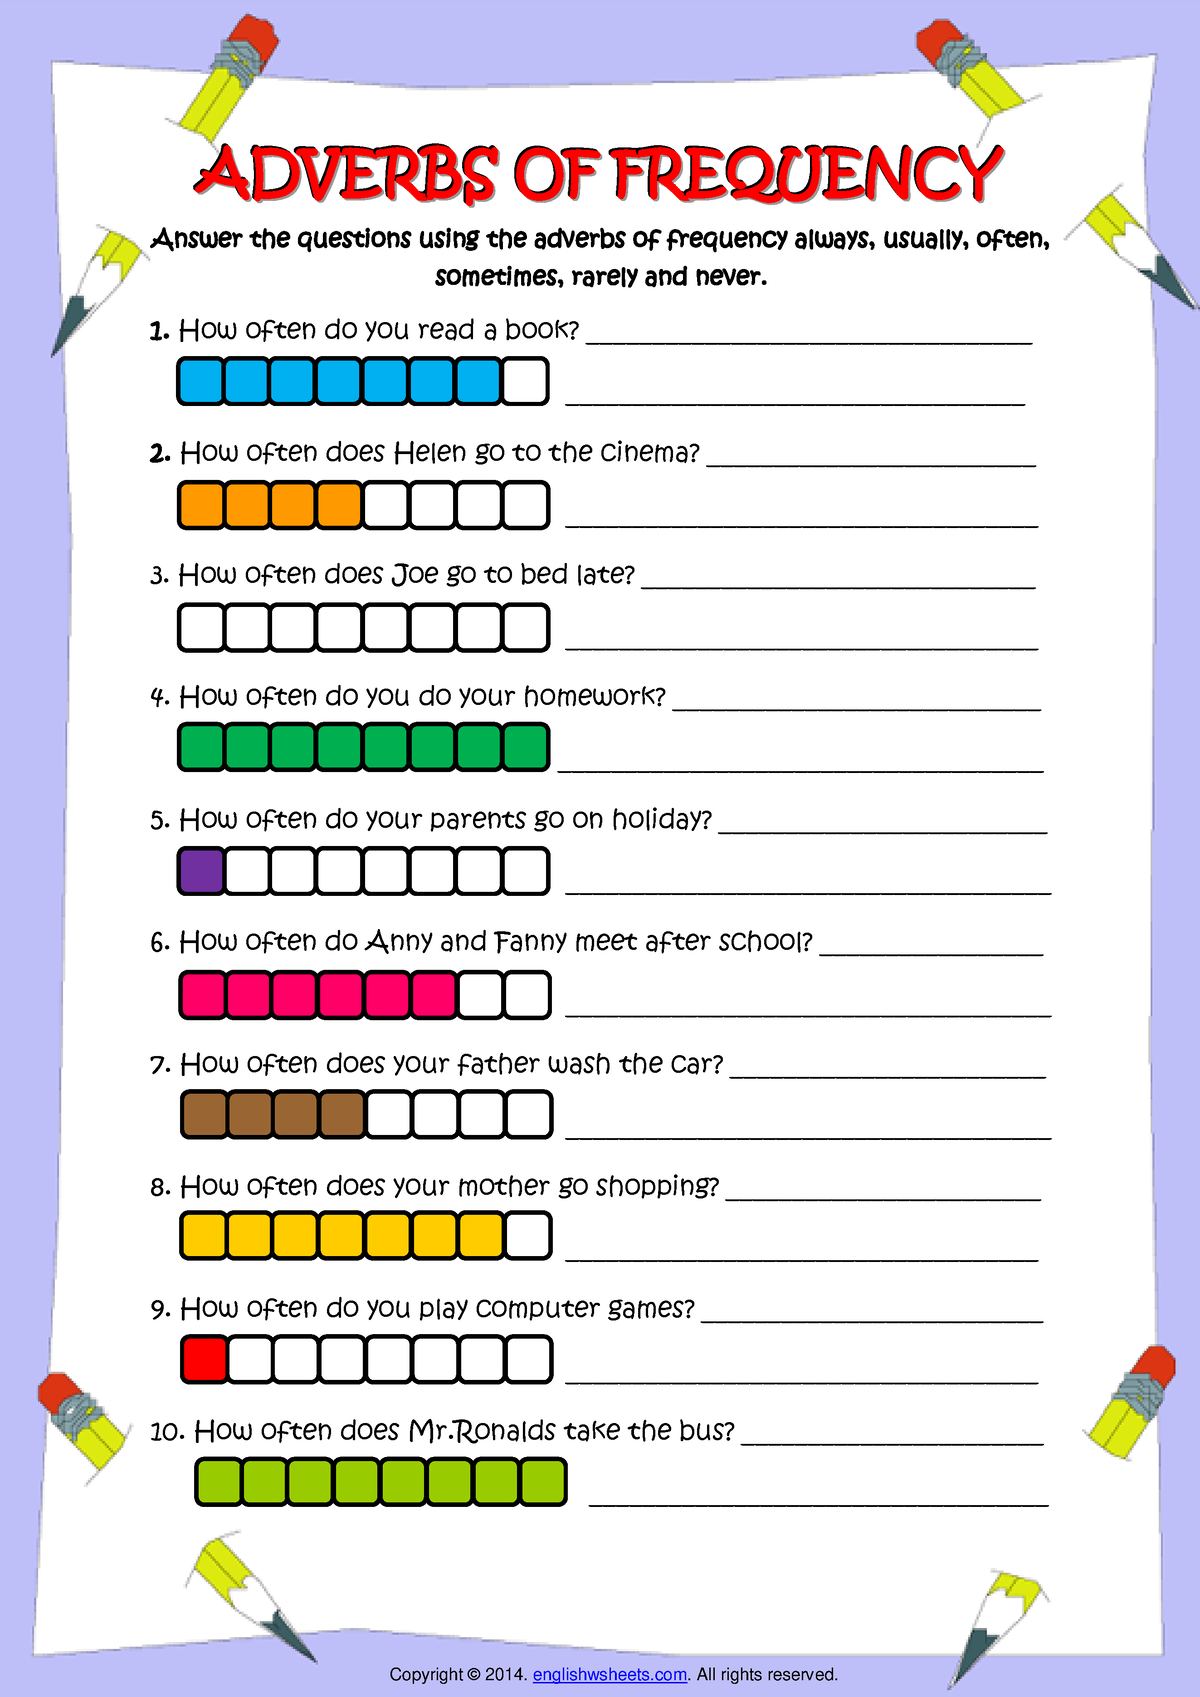 Adverbs Of Frequency Worksheet For Class 5